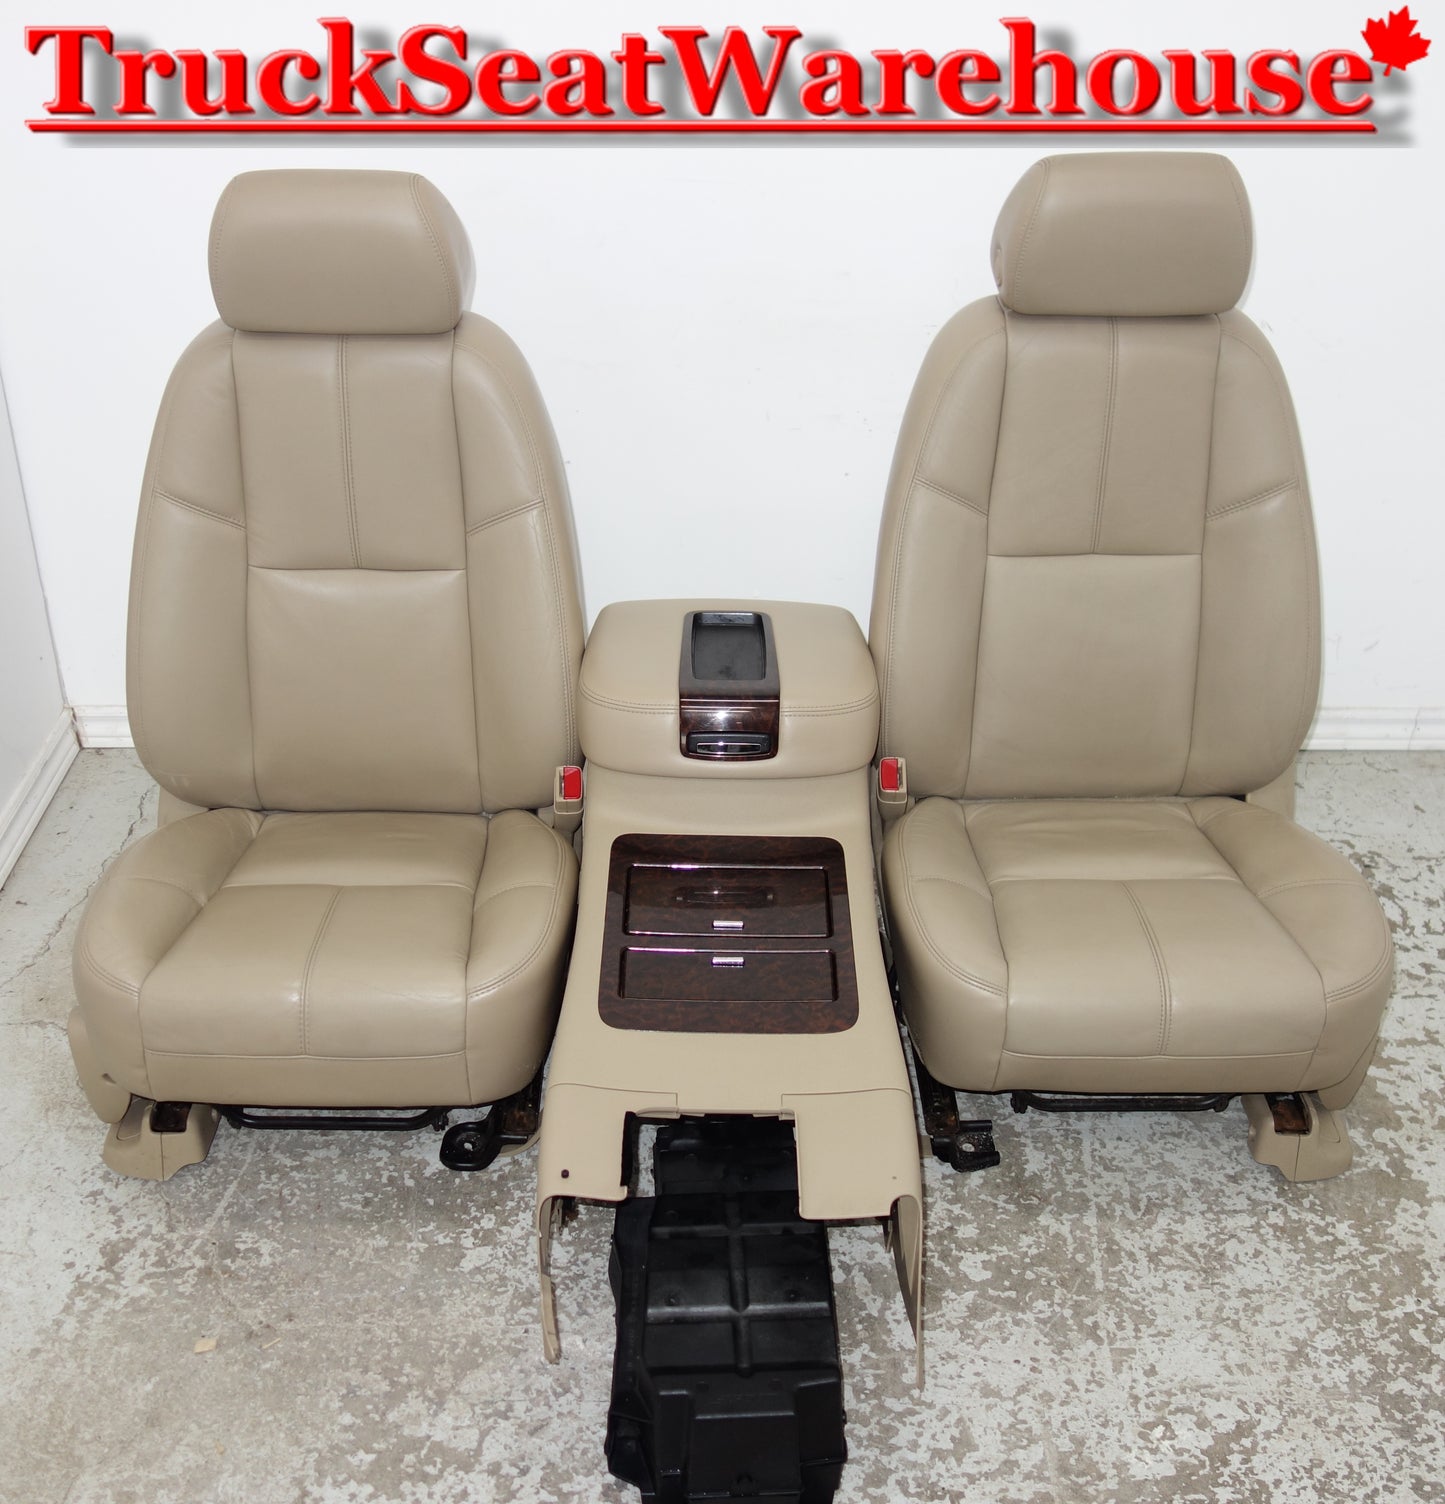 Tan cashmere colored leather front seats and console from a 2013 Yukon Denali | fits 2007-14 style silverado sierra yukon tahoe suburban